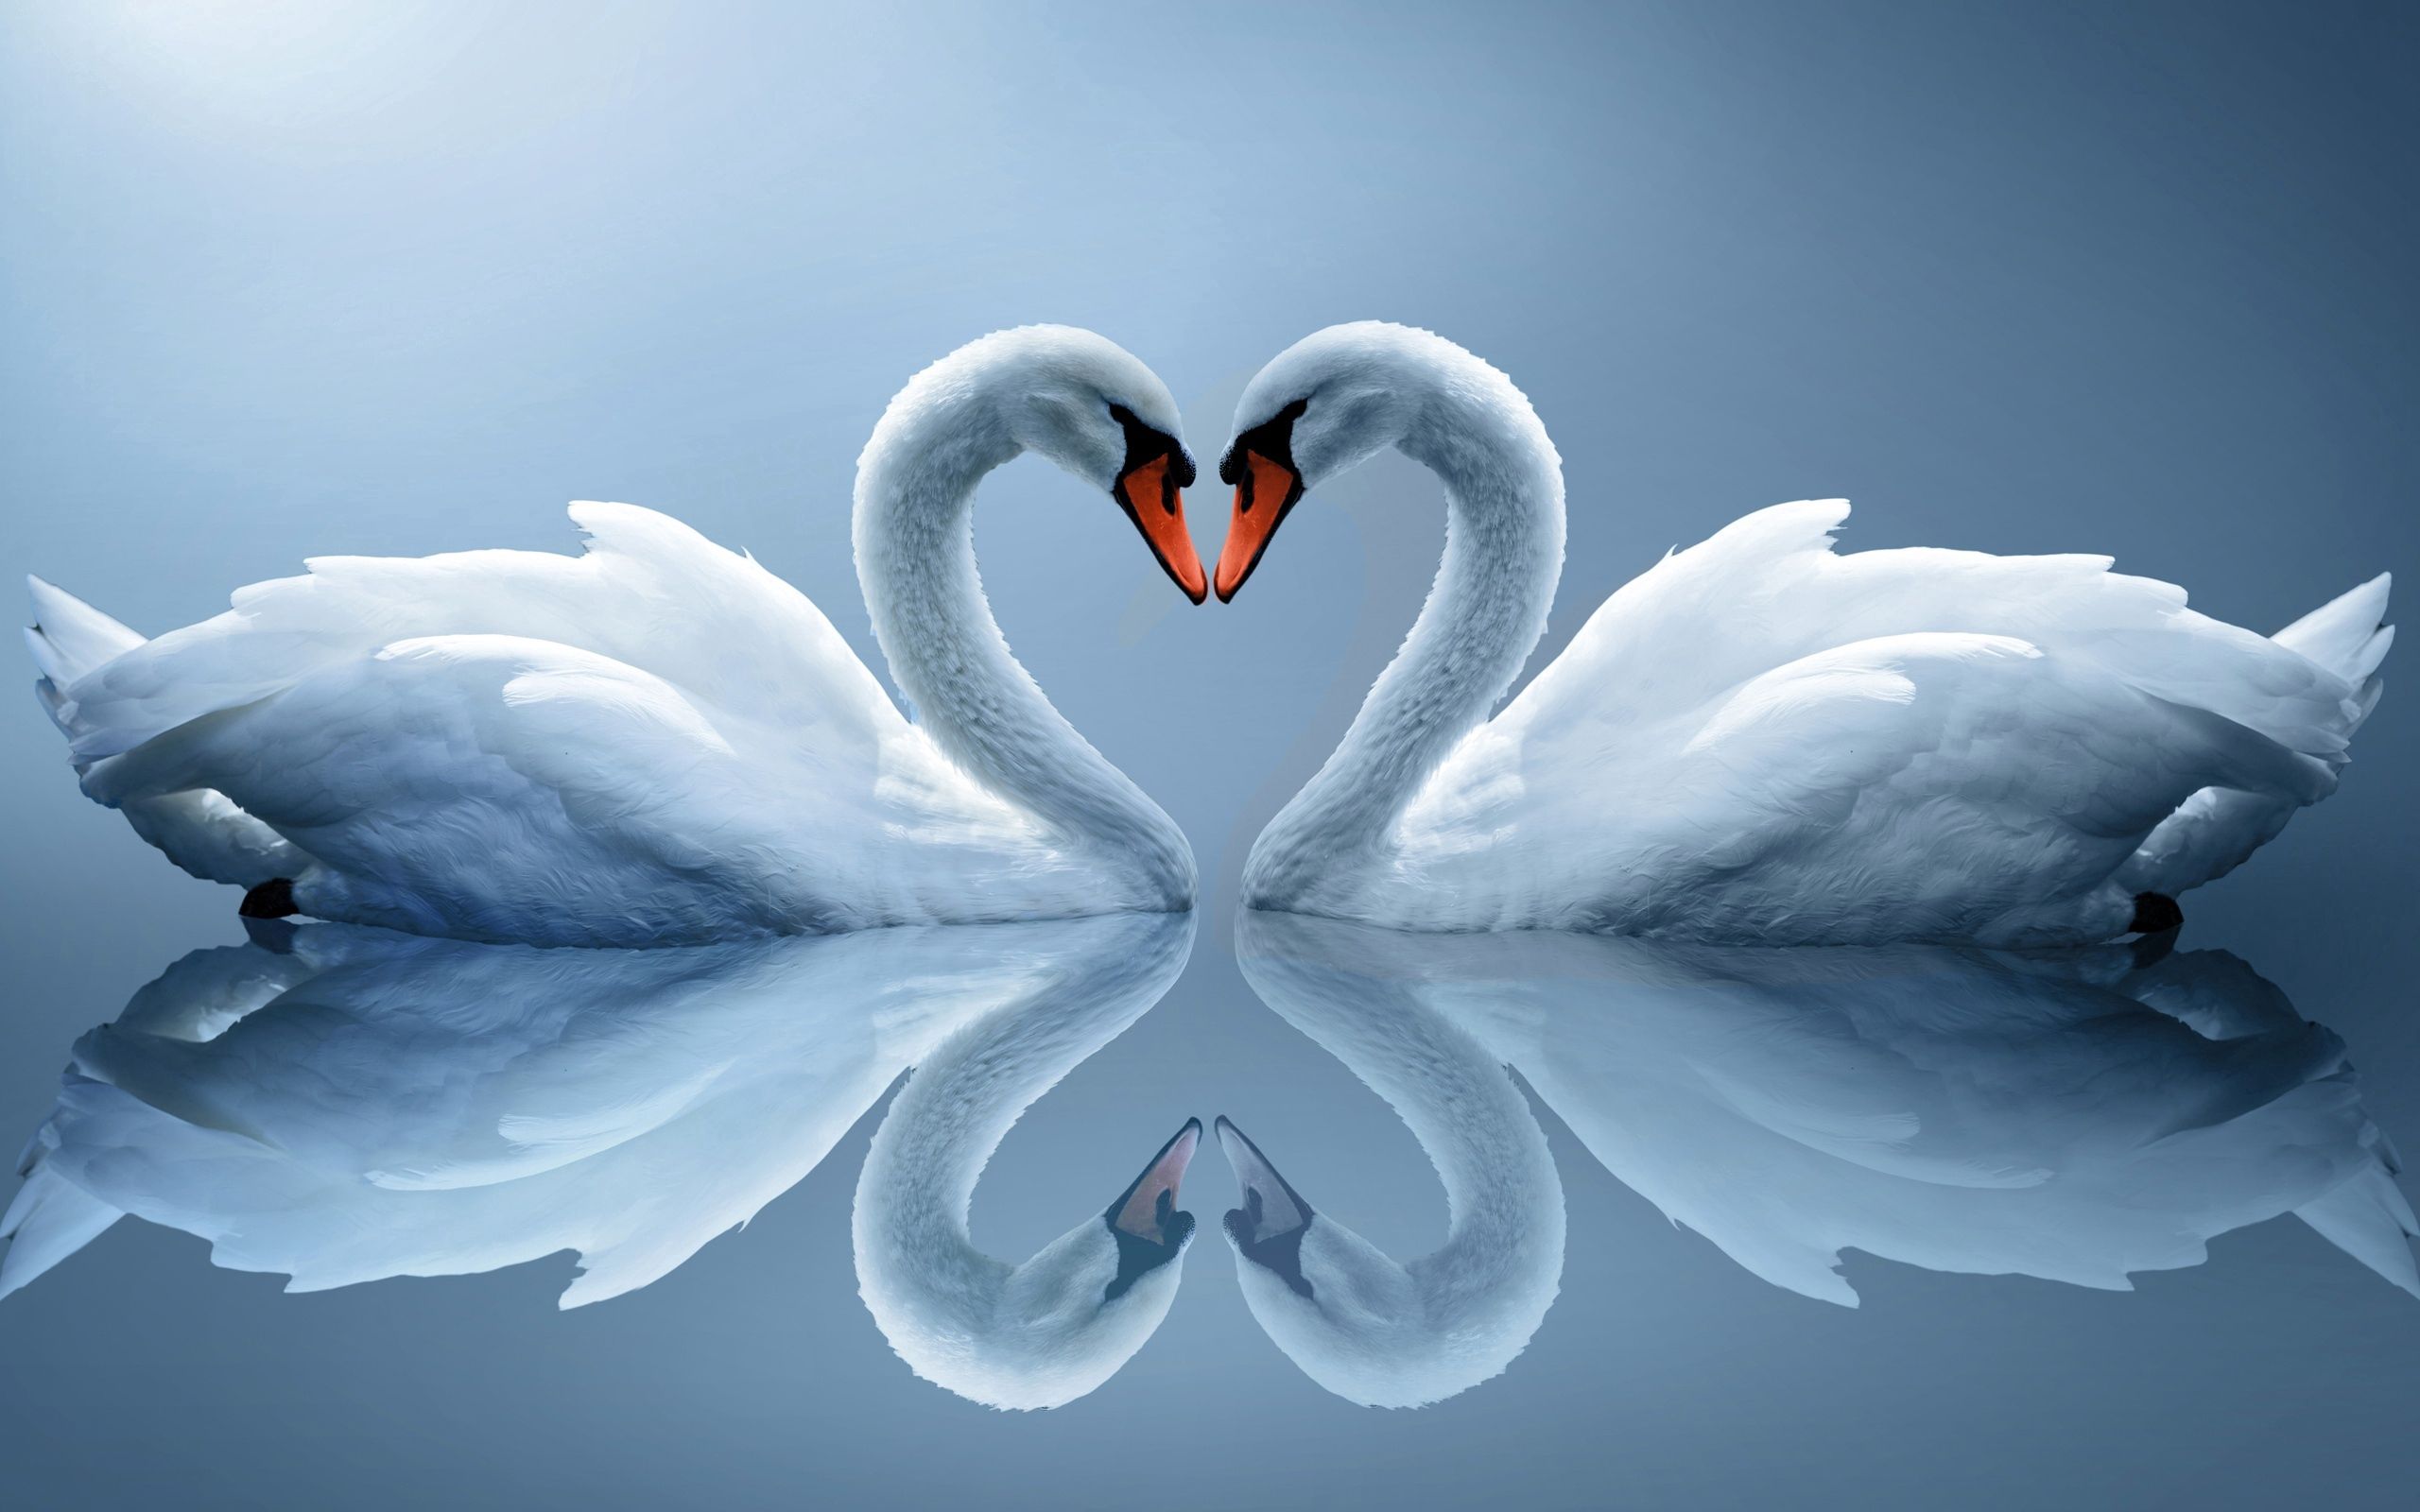 animals, heart, couple, reflection, pair, white swans High Definition image